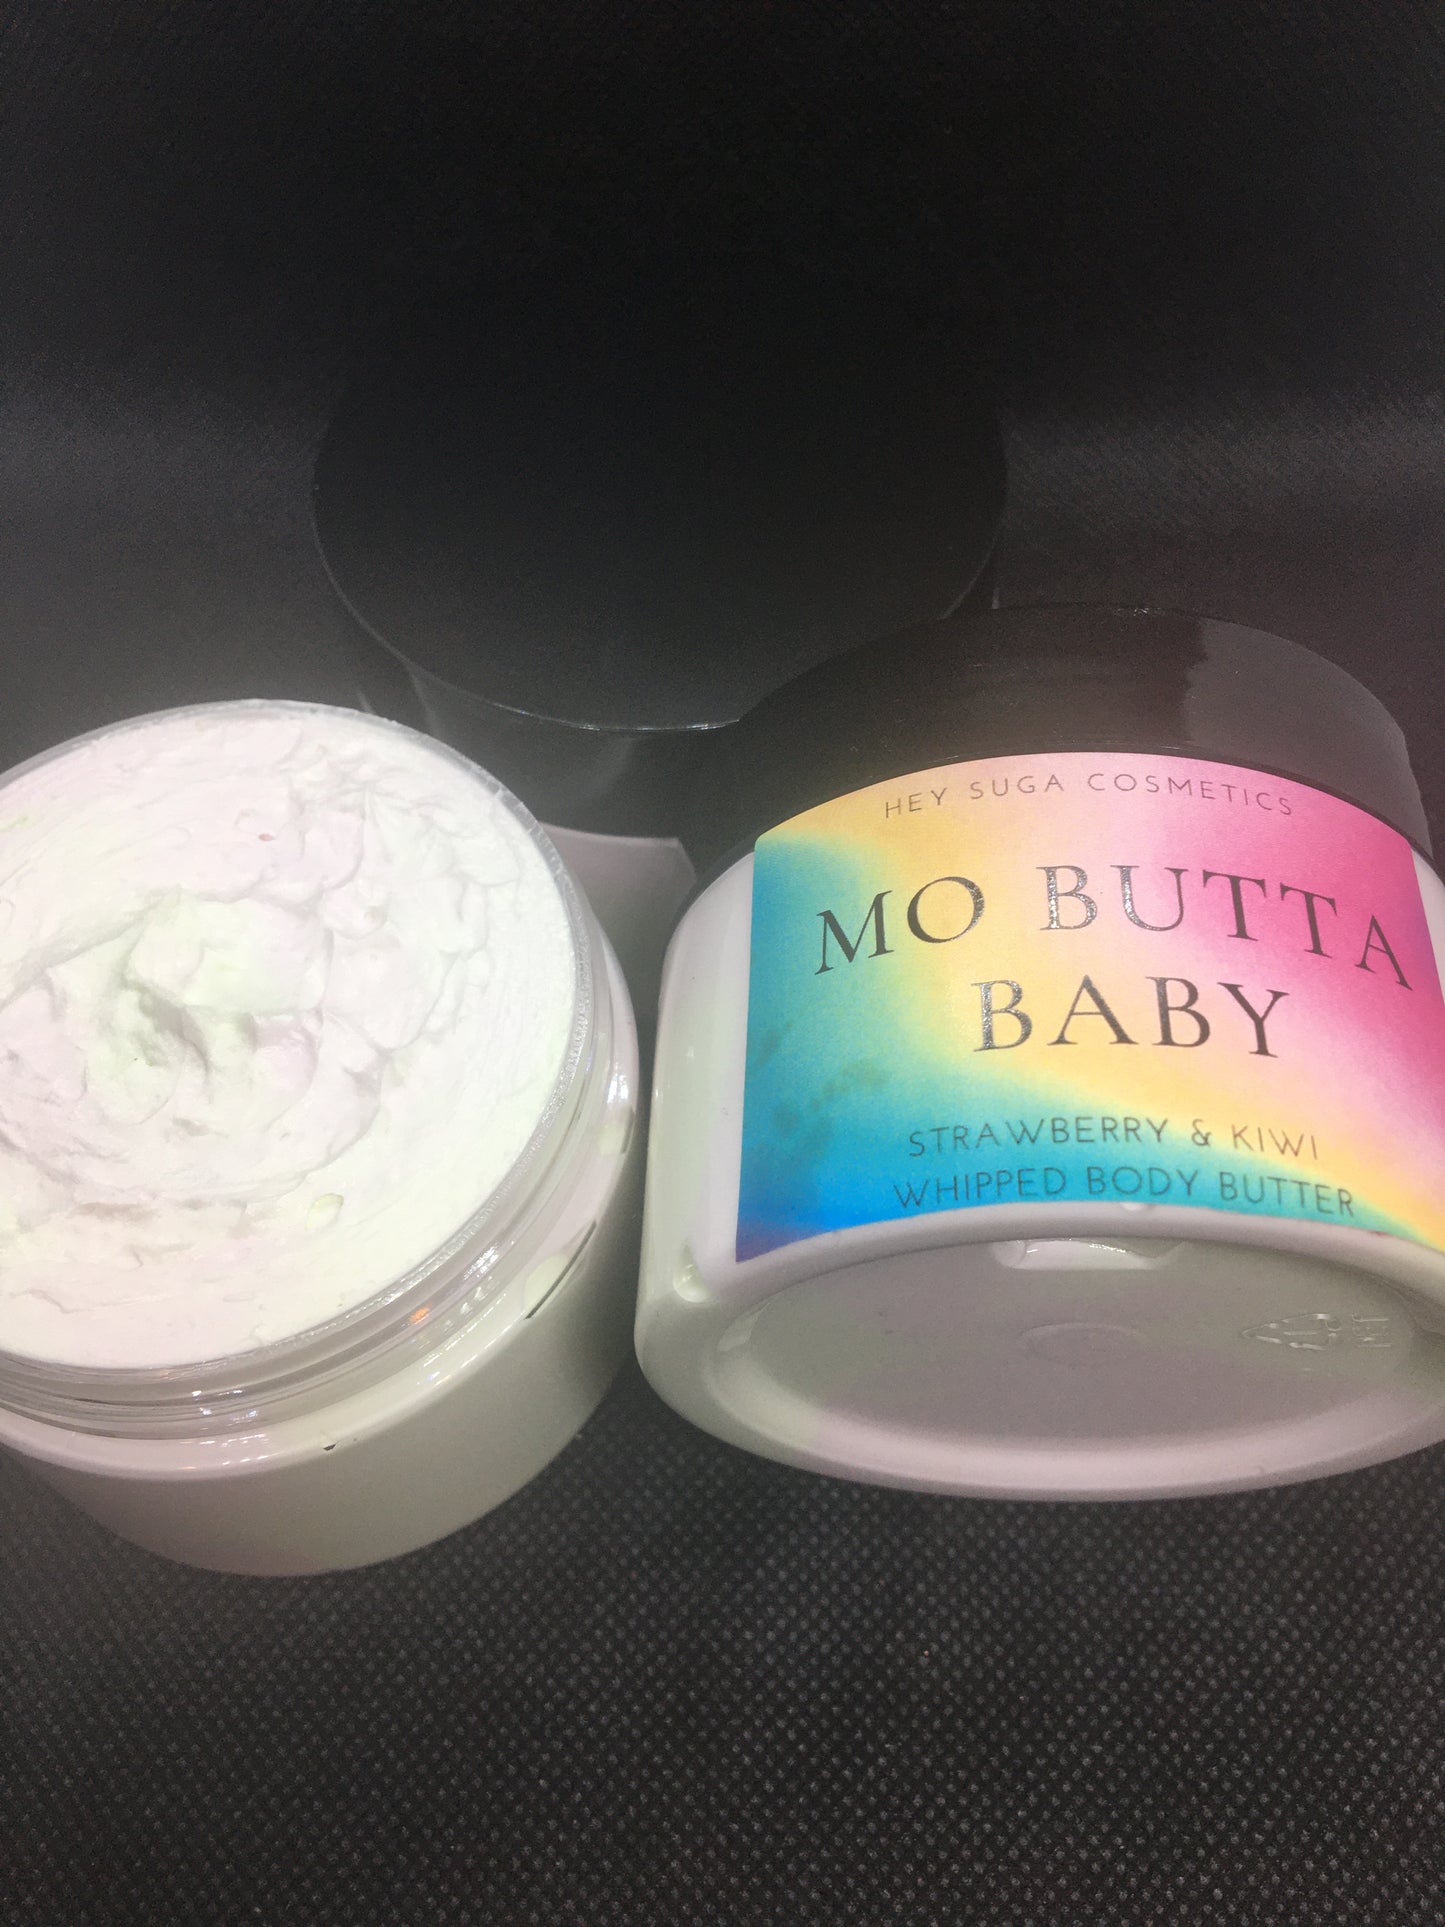 Mo Butta Baby Whipped Body Butter